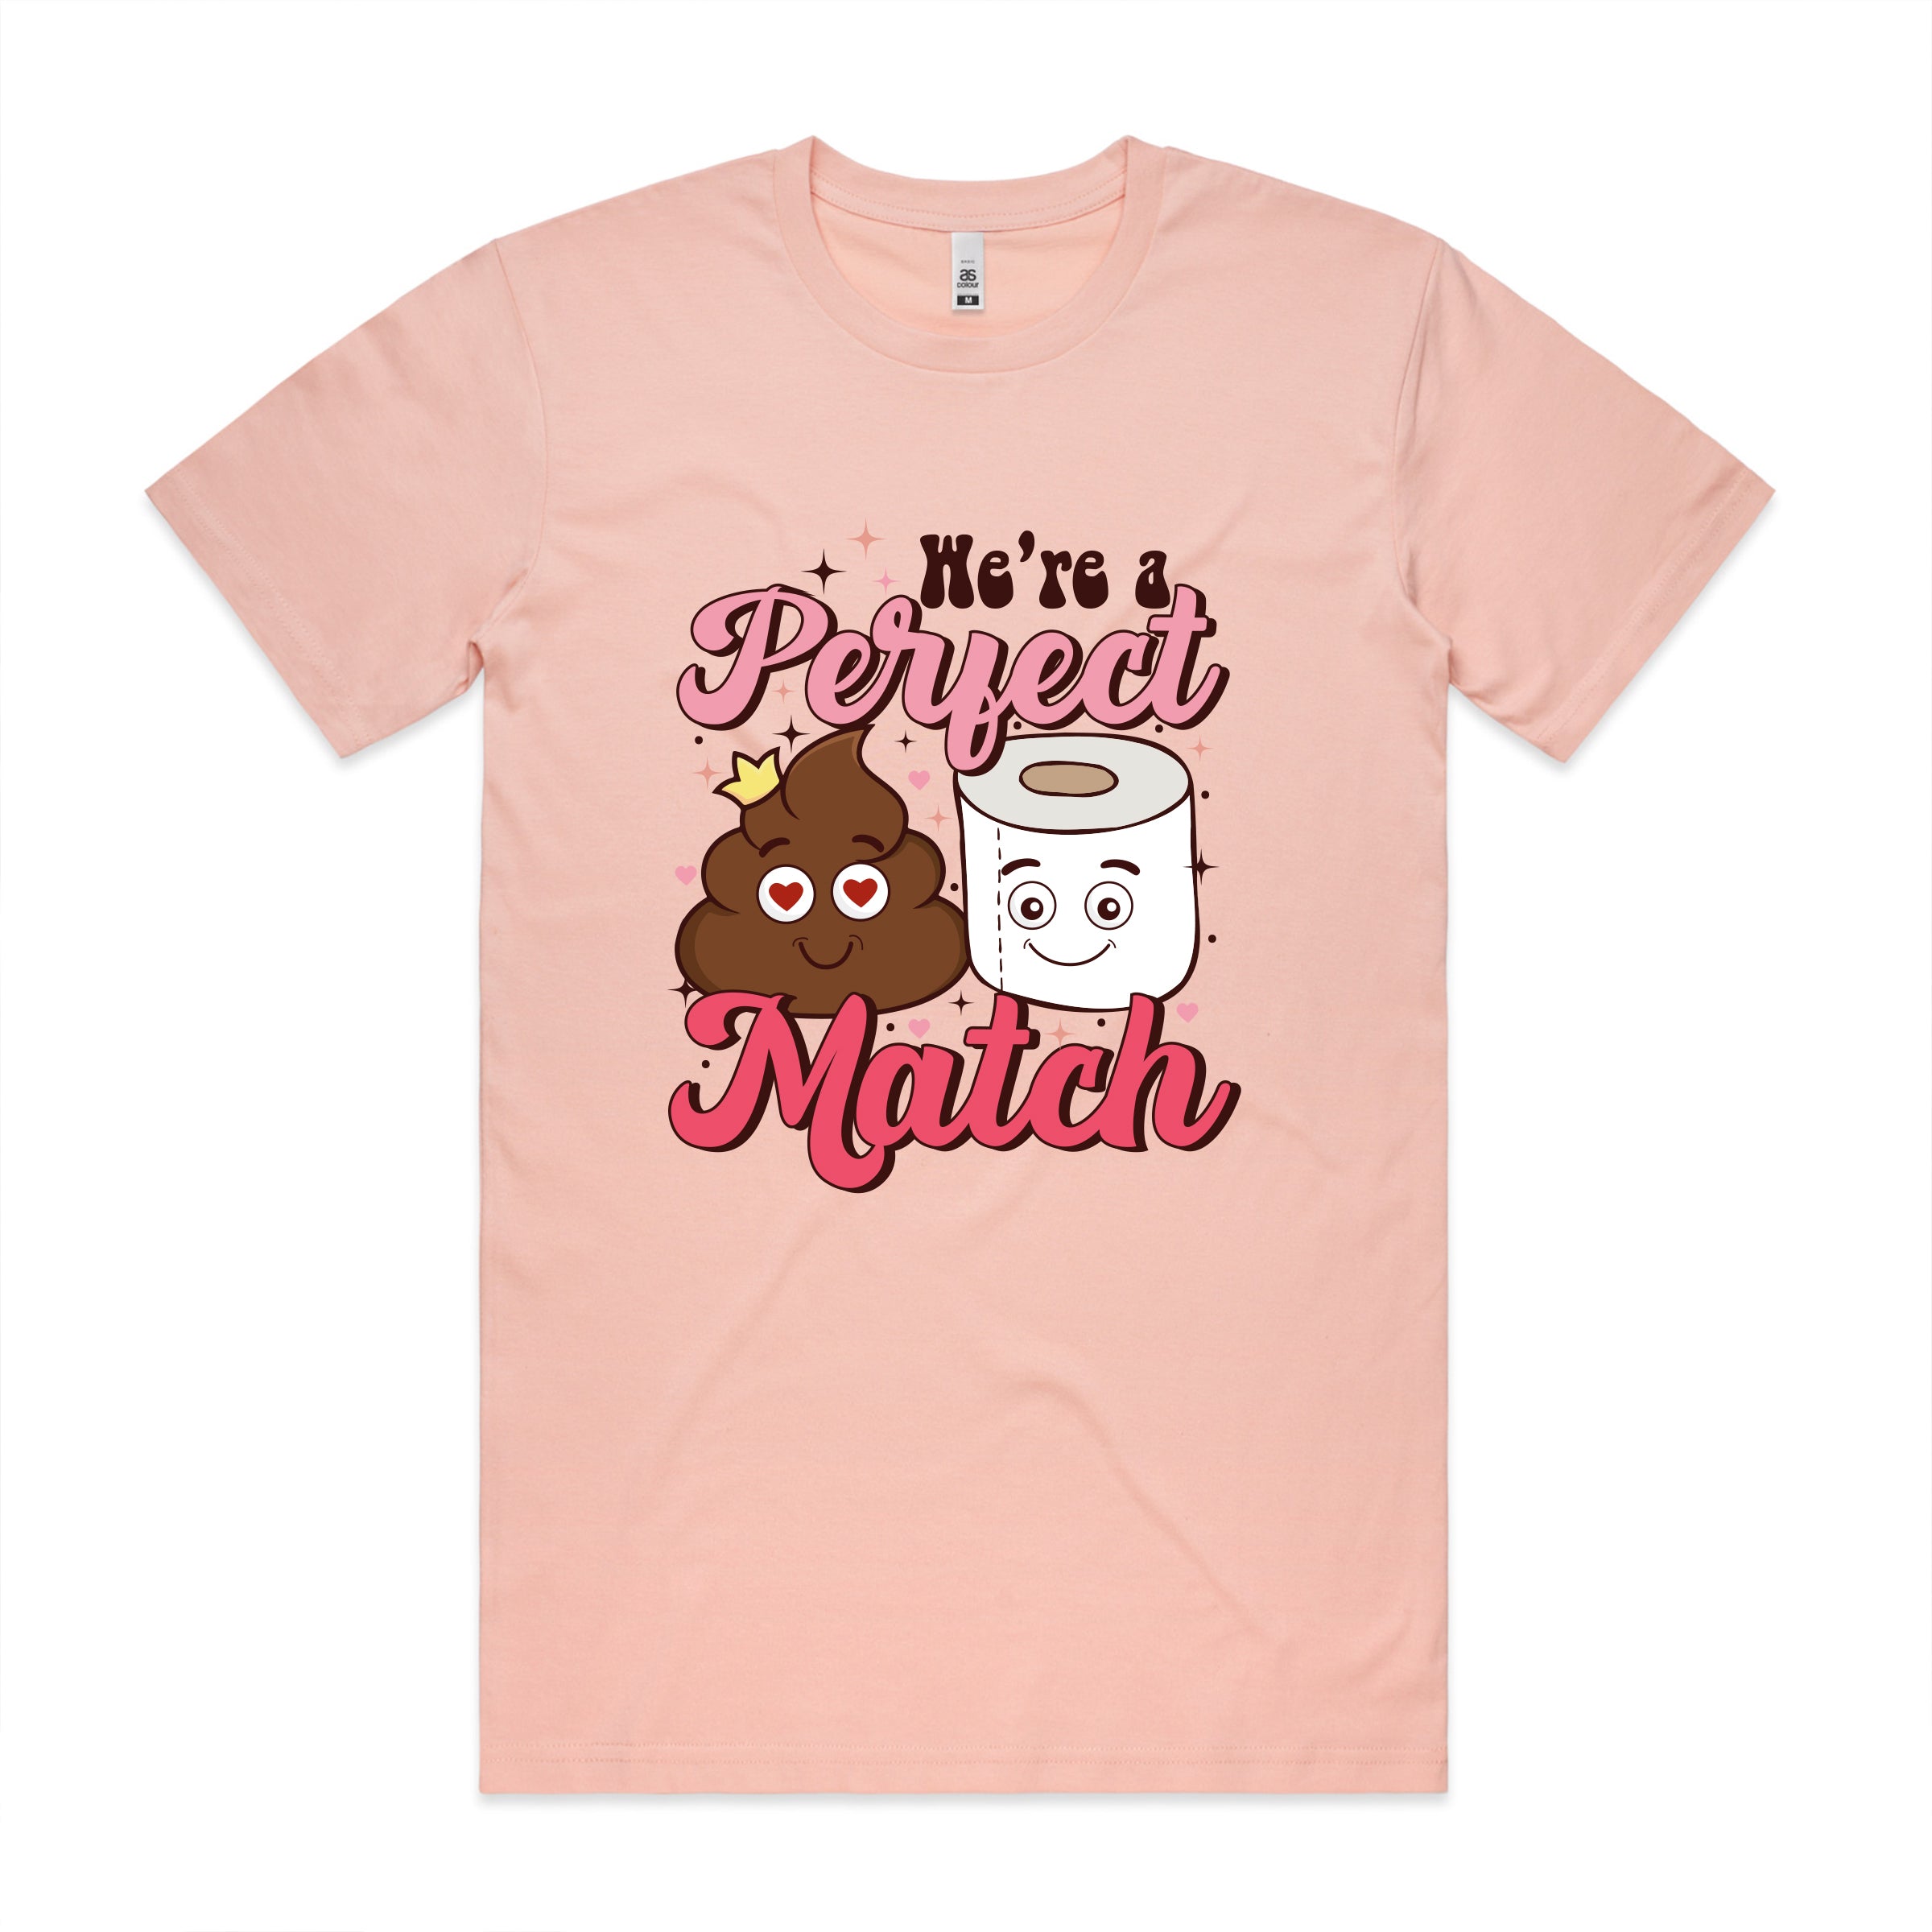 WE'RE A PERFECT MATCH TSHIRT